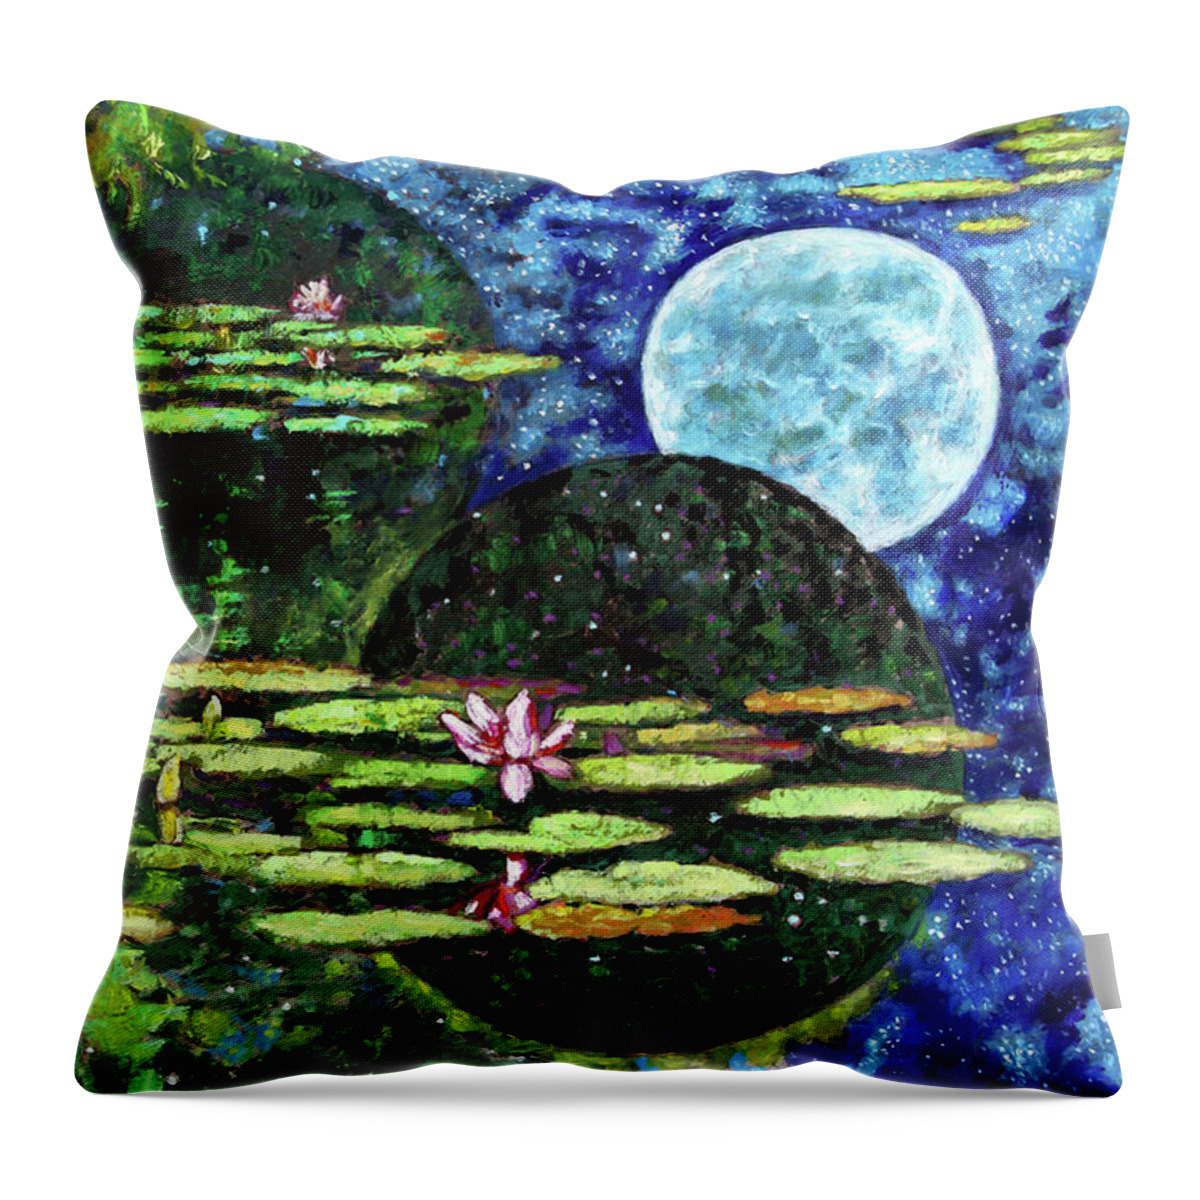 Water Lilies Throw Pillow featuring the painting God's Dream by John Lautermilch